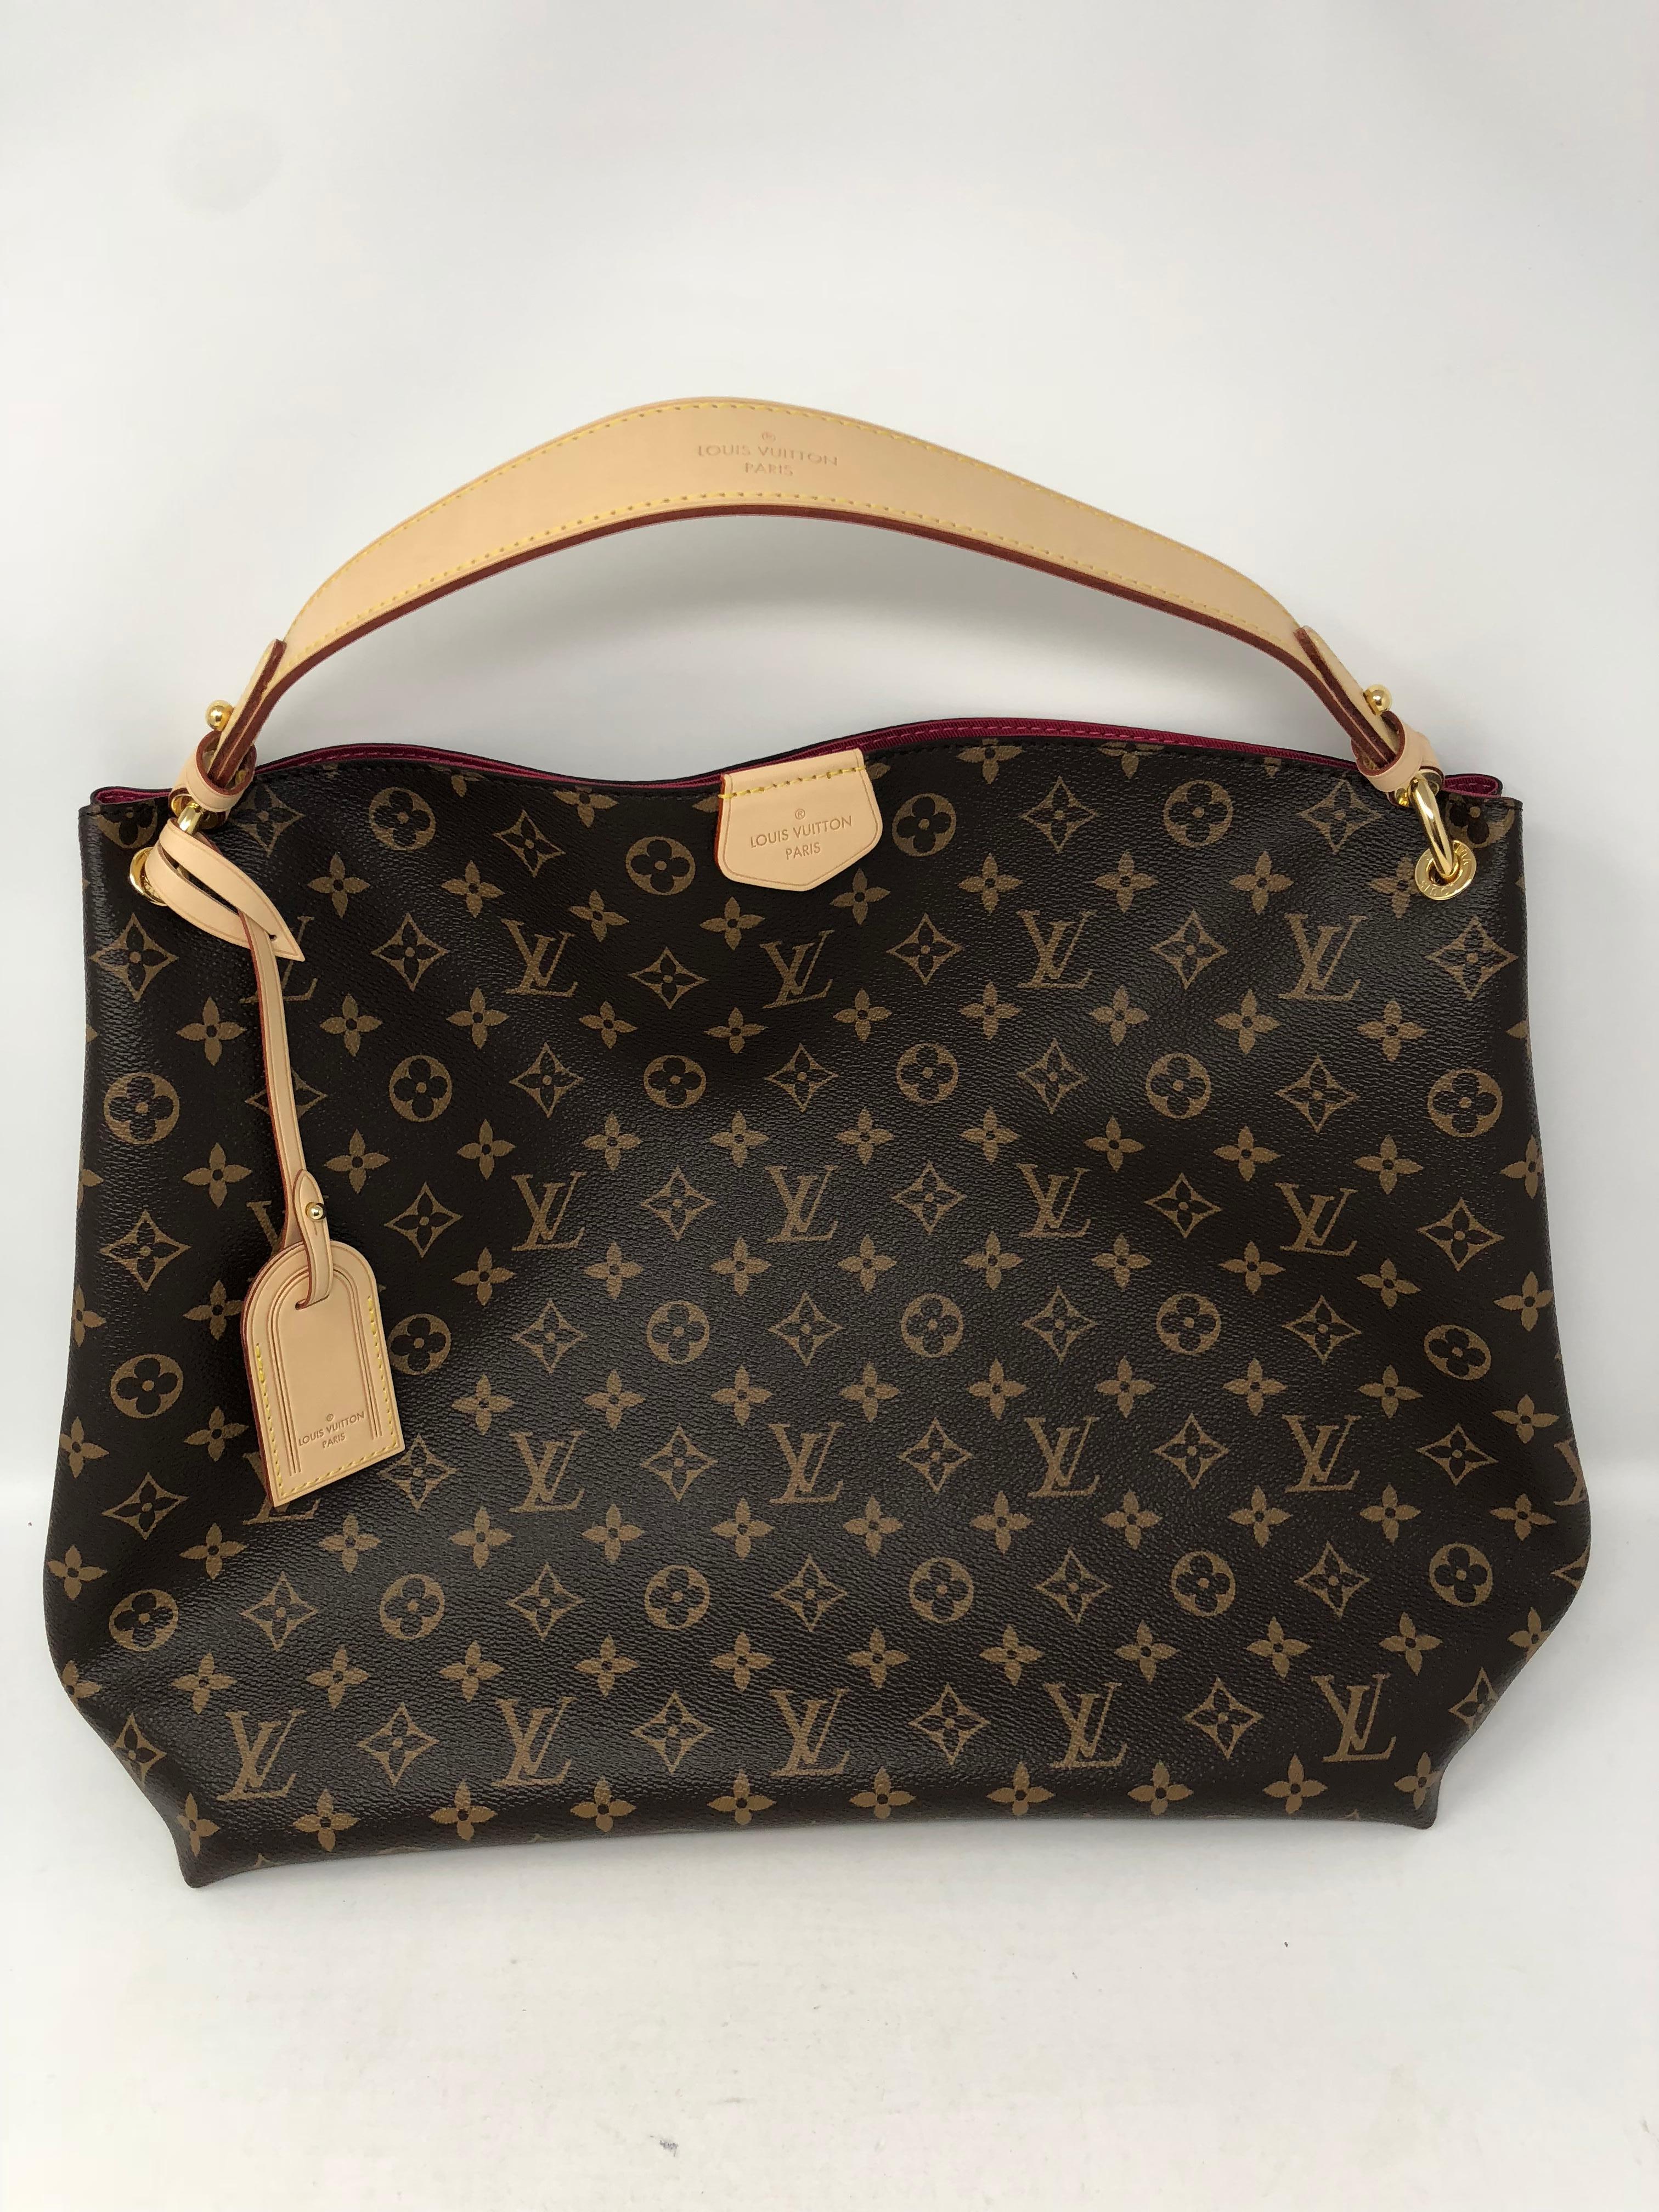 Louis Vuitton Graceful MM in monogram. Sold out and hard to find Graceful is the perfect every day bag. This one is brand new and never used. Comes with original dust cover and box. Add this one to your collection. Guaranteed authentic. 